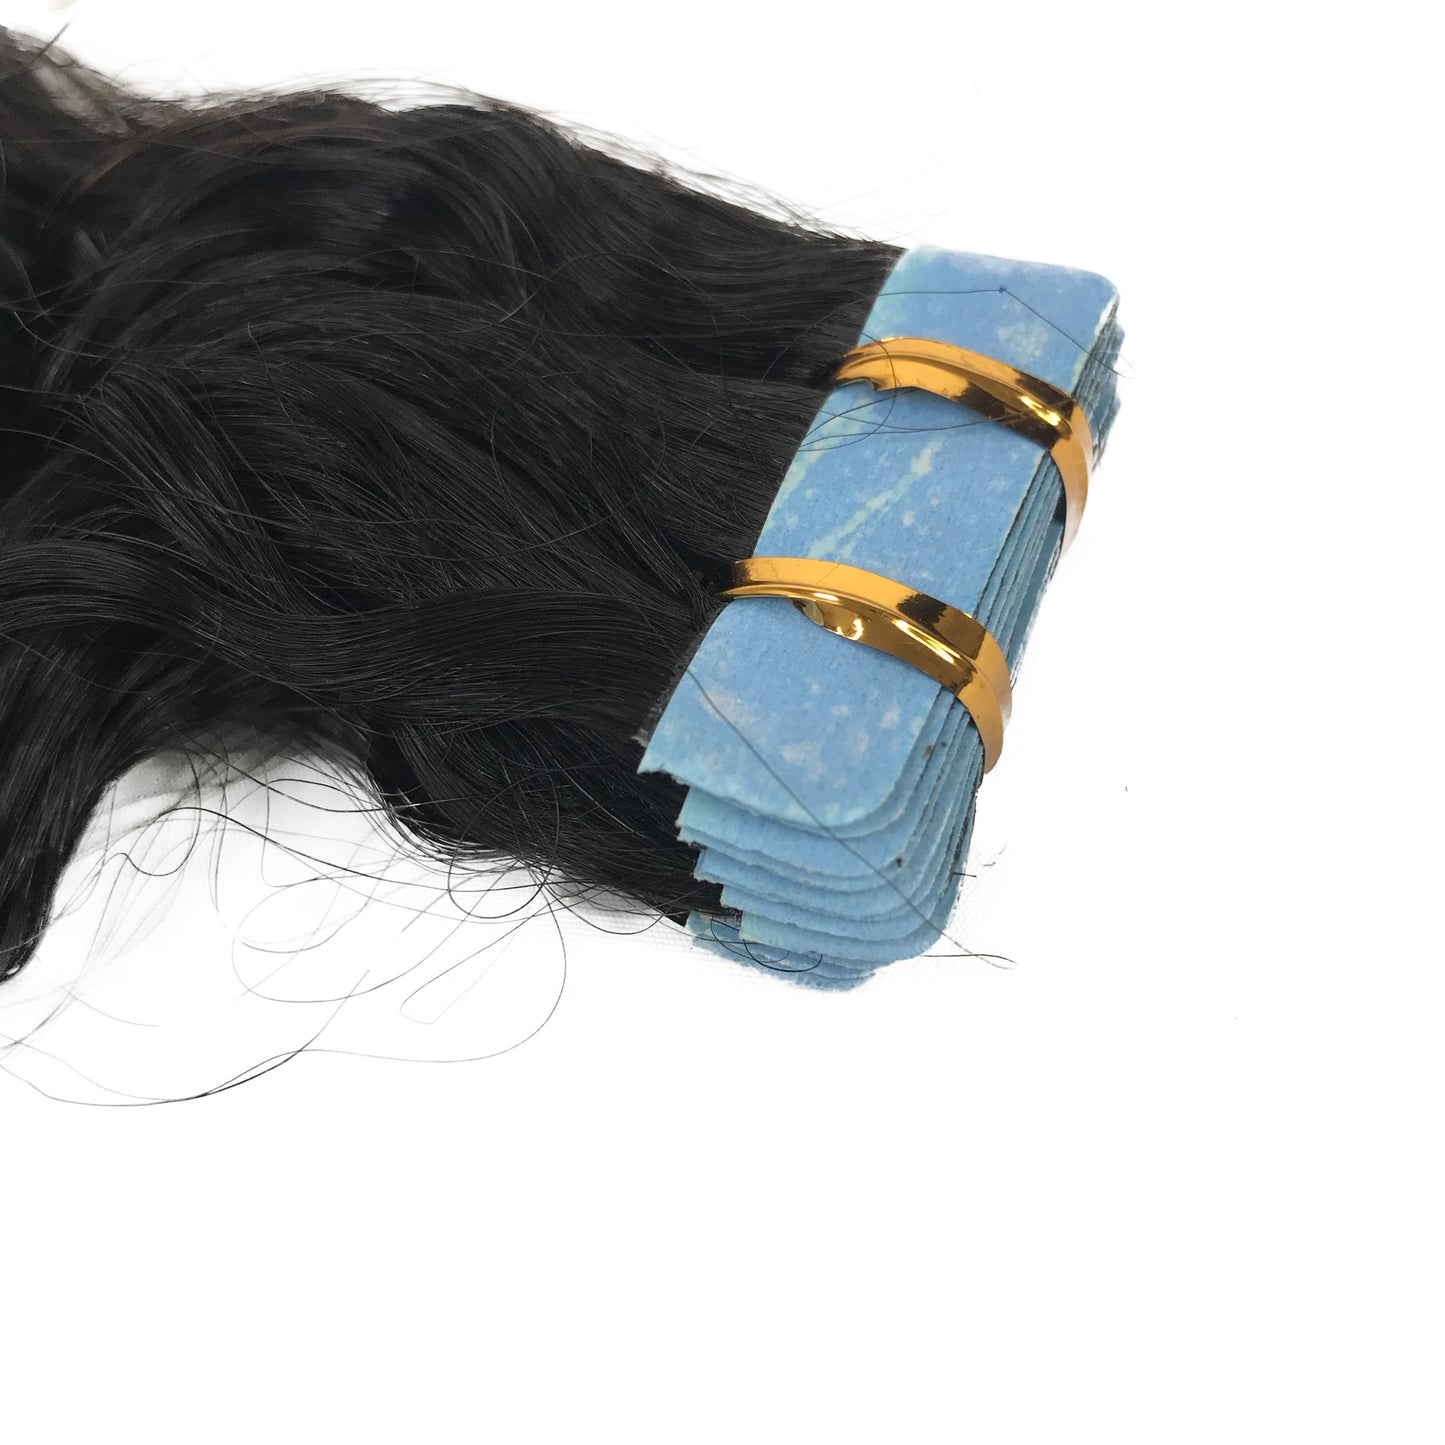 9A Deep Wave Tape-In Human Hair Extension Natural